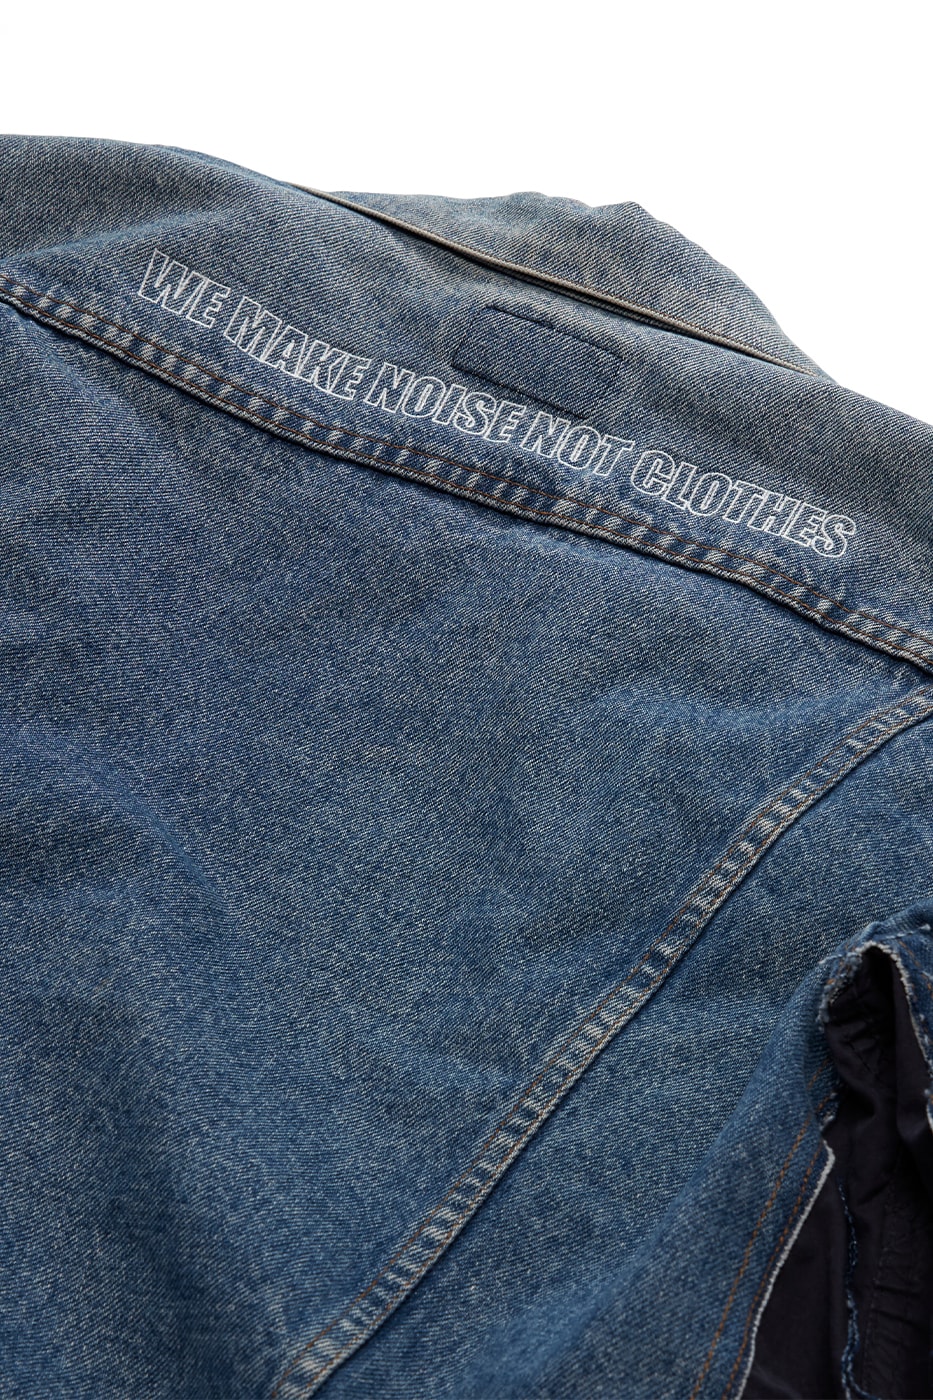 Undercover levis 2022 fall season november 11 american japanese hybrid trucker jeans cable knit indigo cargo we make noise not clothes black release info date price